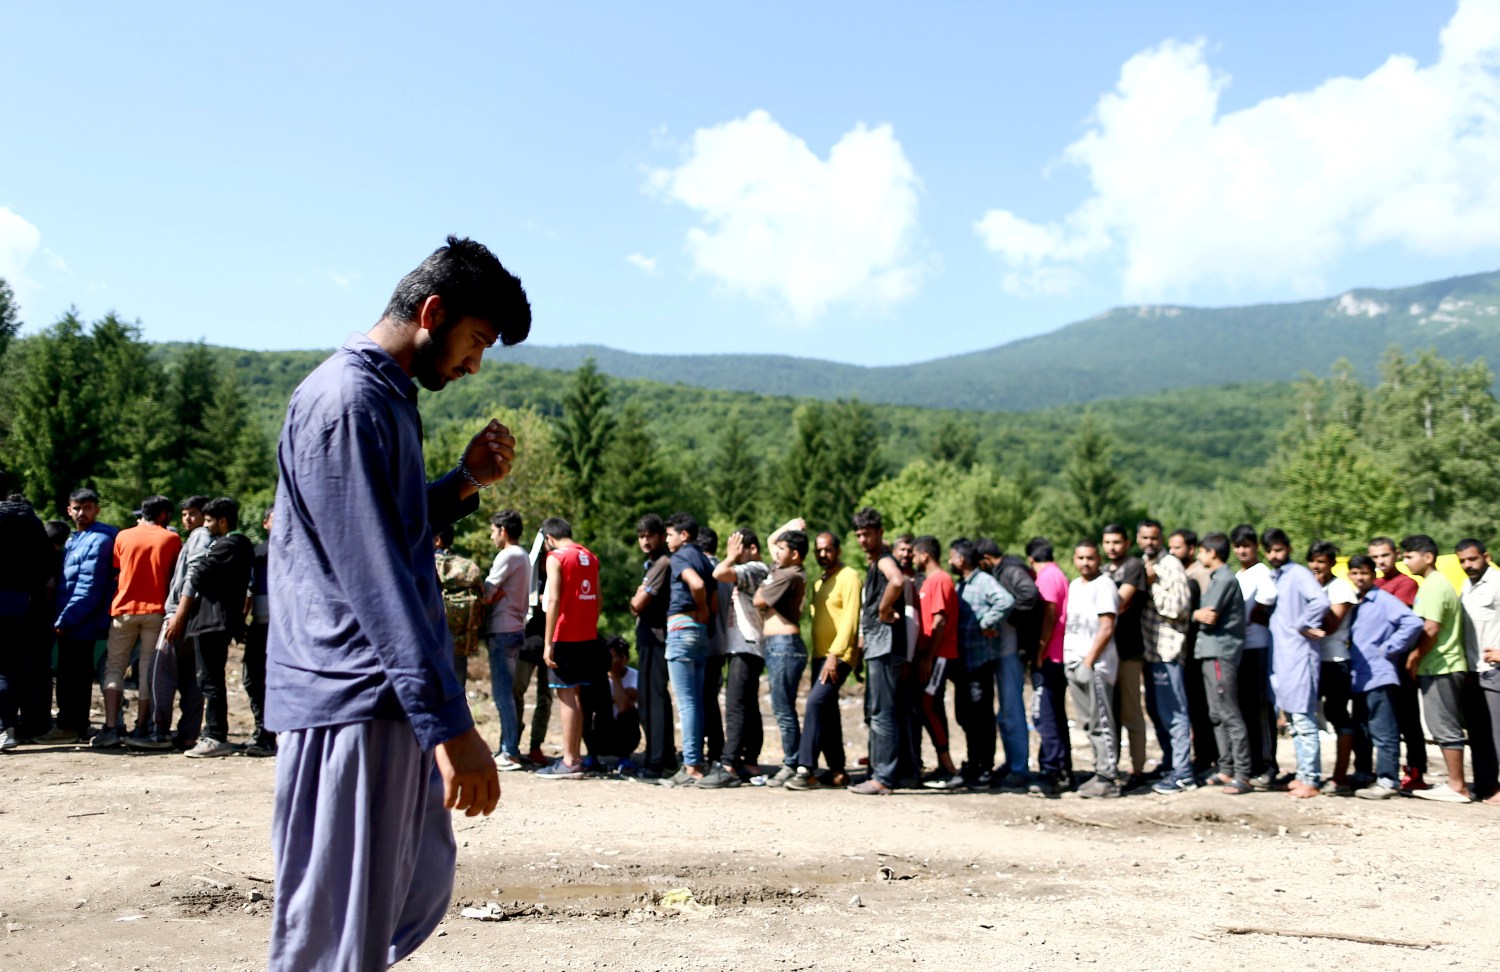 REFILE - CORRECTING GRAMMAR Migrants wait for food and clothes at the migrant camp Vucjak, in Bihac area, Bosnia and Herzegovina, June 19, 2019. REUTERS/Antonio Bronic - RC13263A9760